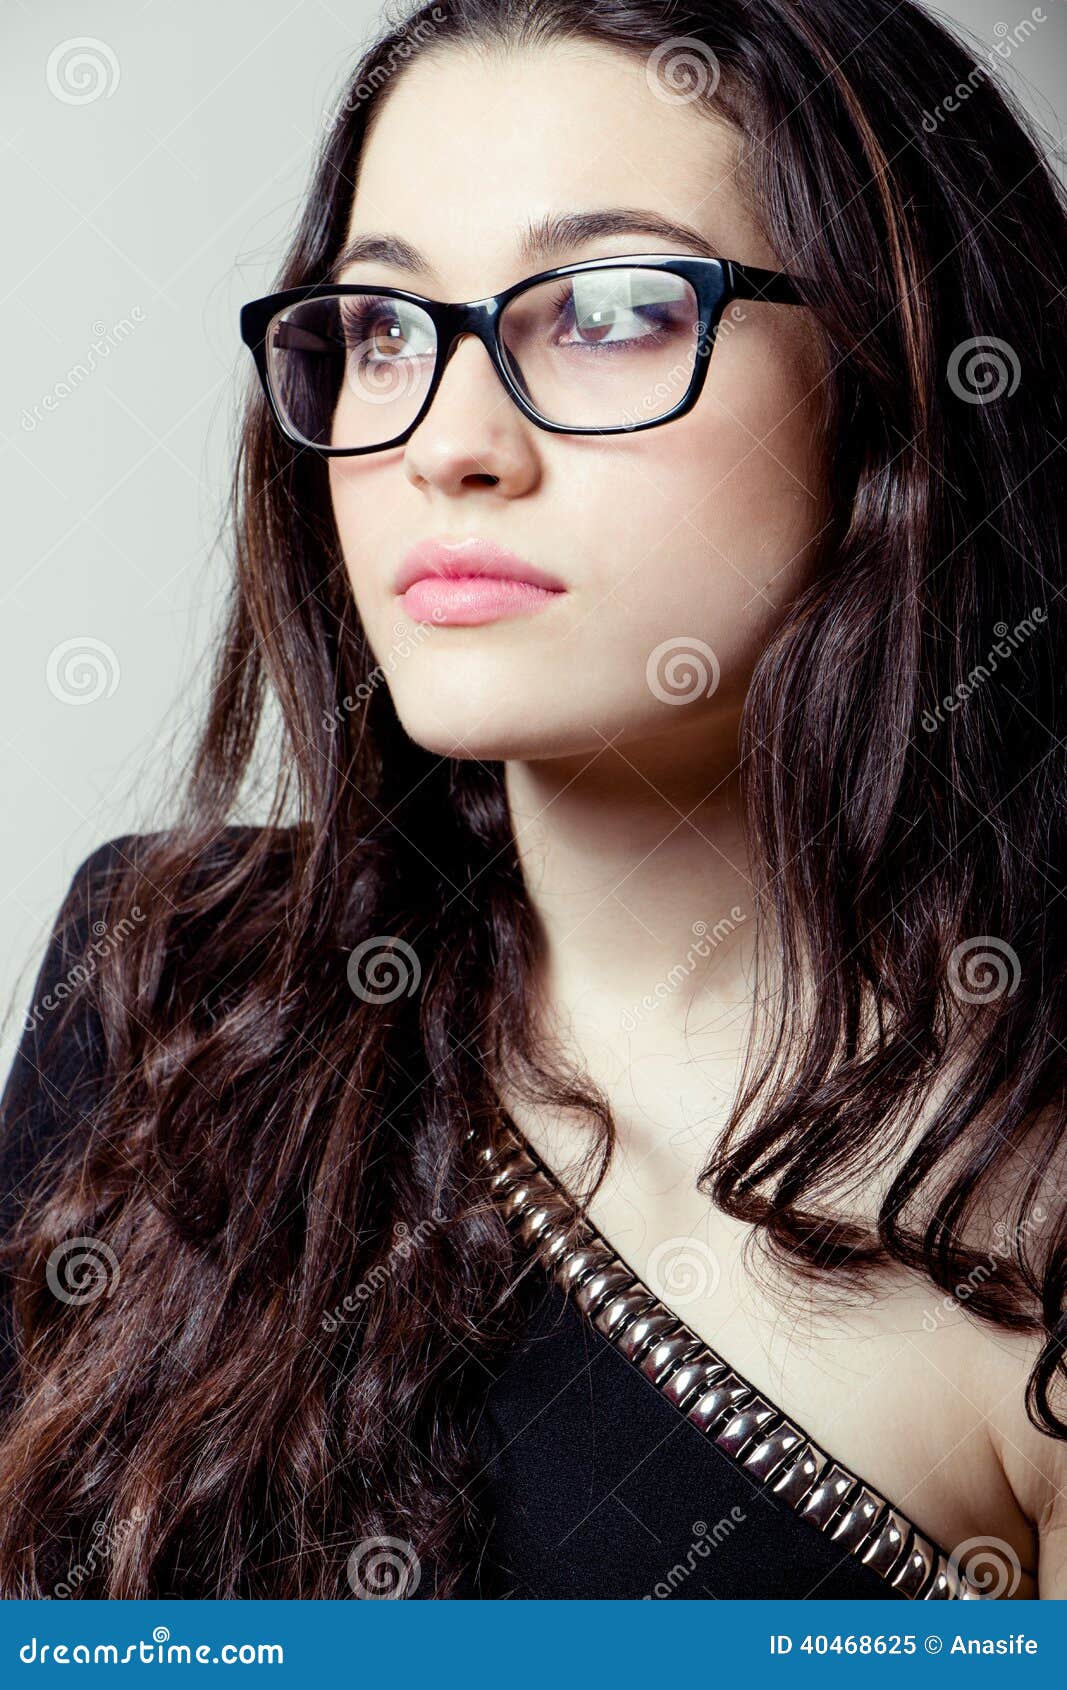 Beautiful Girl With Glasses Portrait Stock Image Image Of Person Cute 40468625 